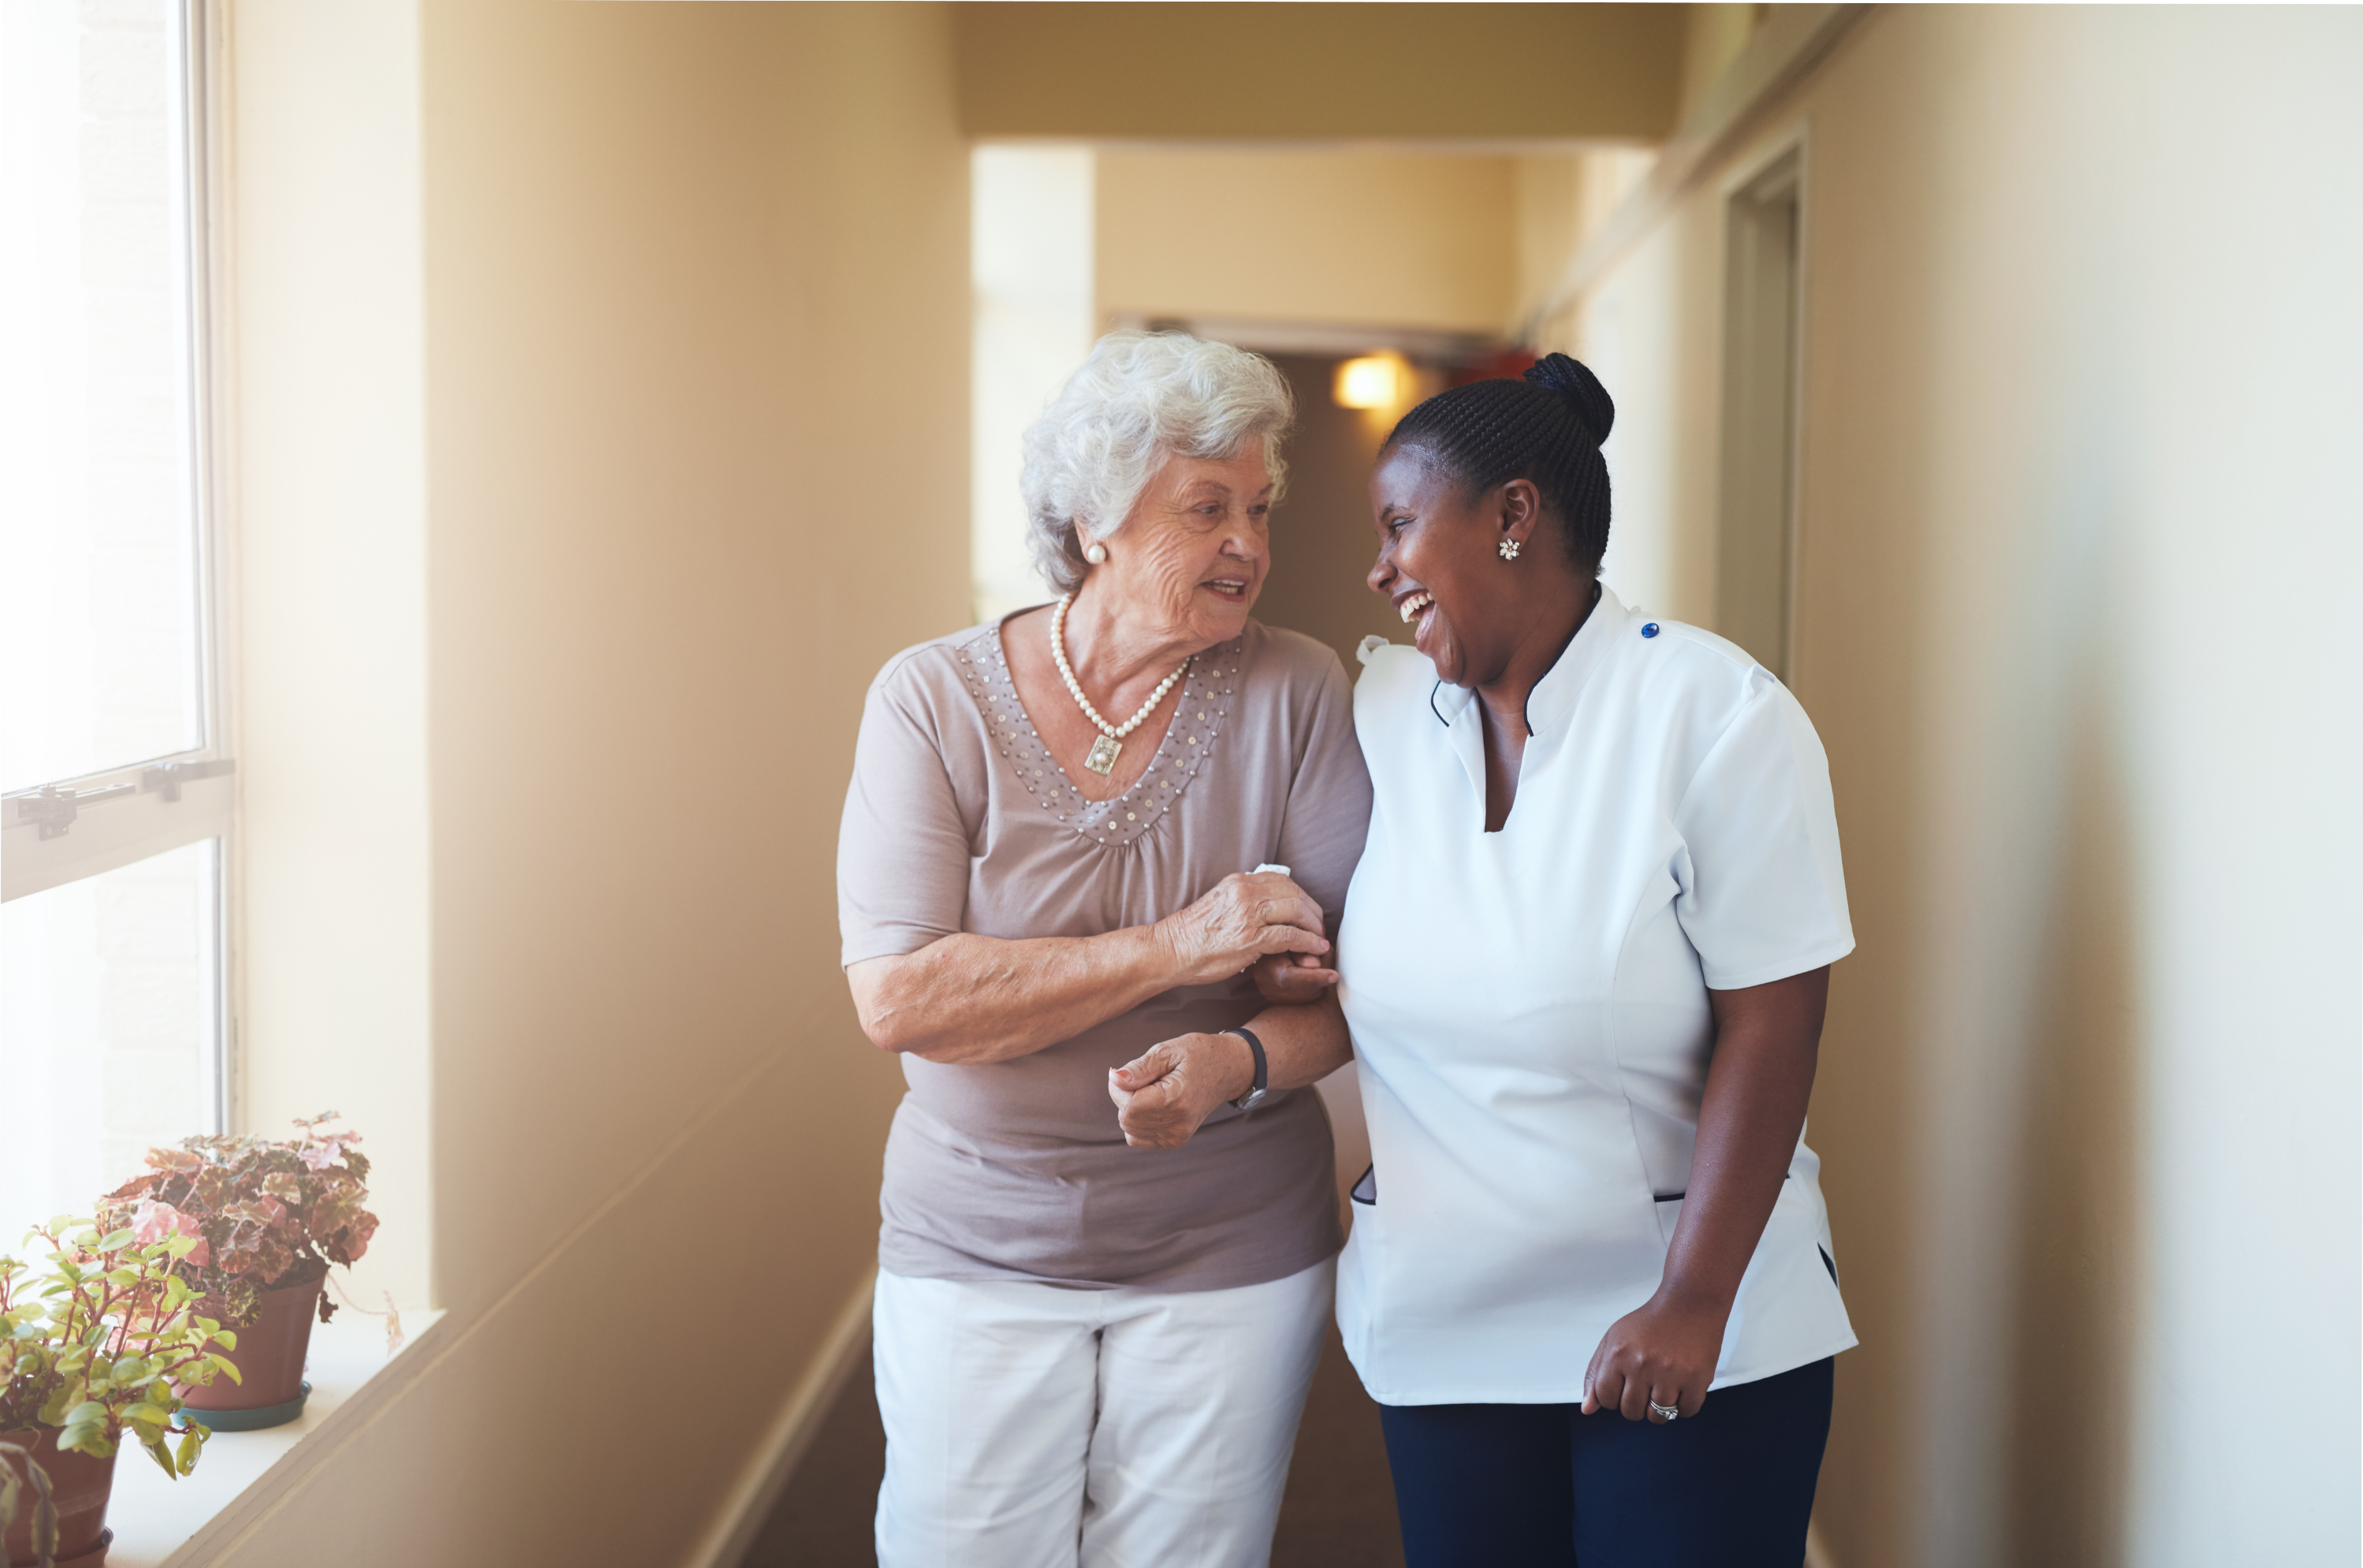 A black woman caregiver assisting and happily conversing with a white elderly woman while walking.